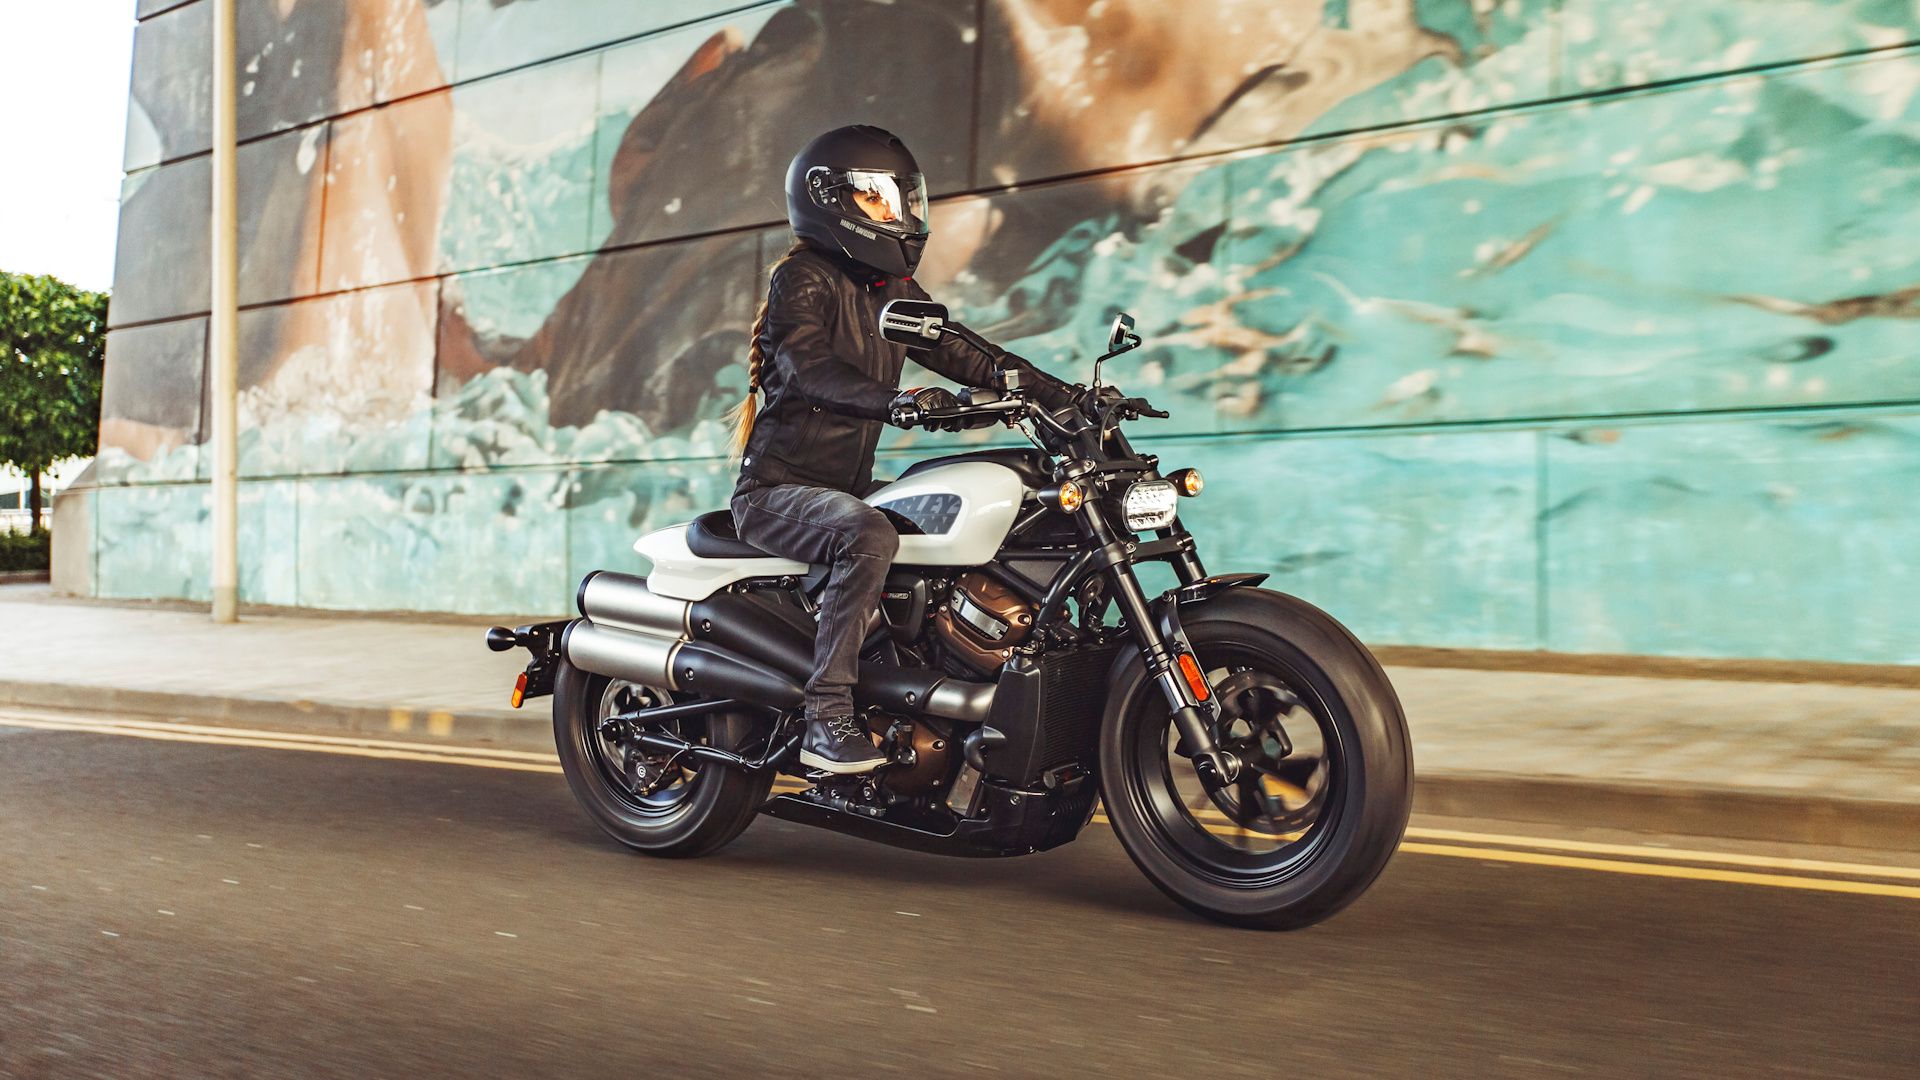 Harley Davidson Sportster Iron 883 Review - Pros, Cons, Specs & Ratings